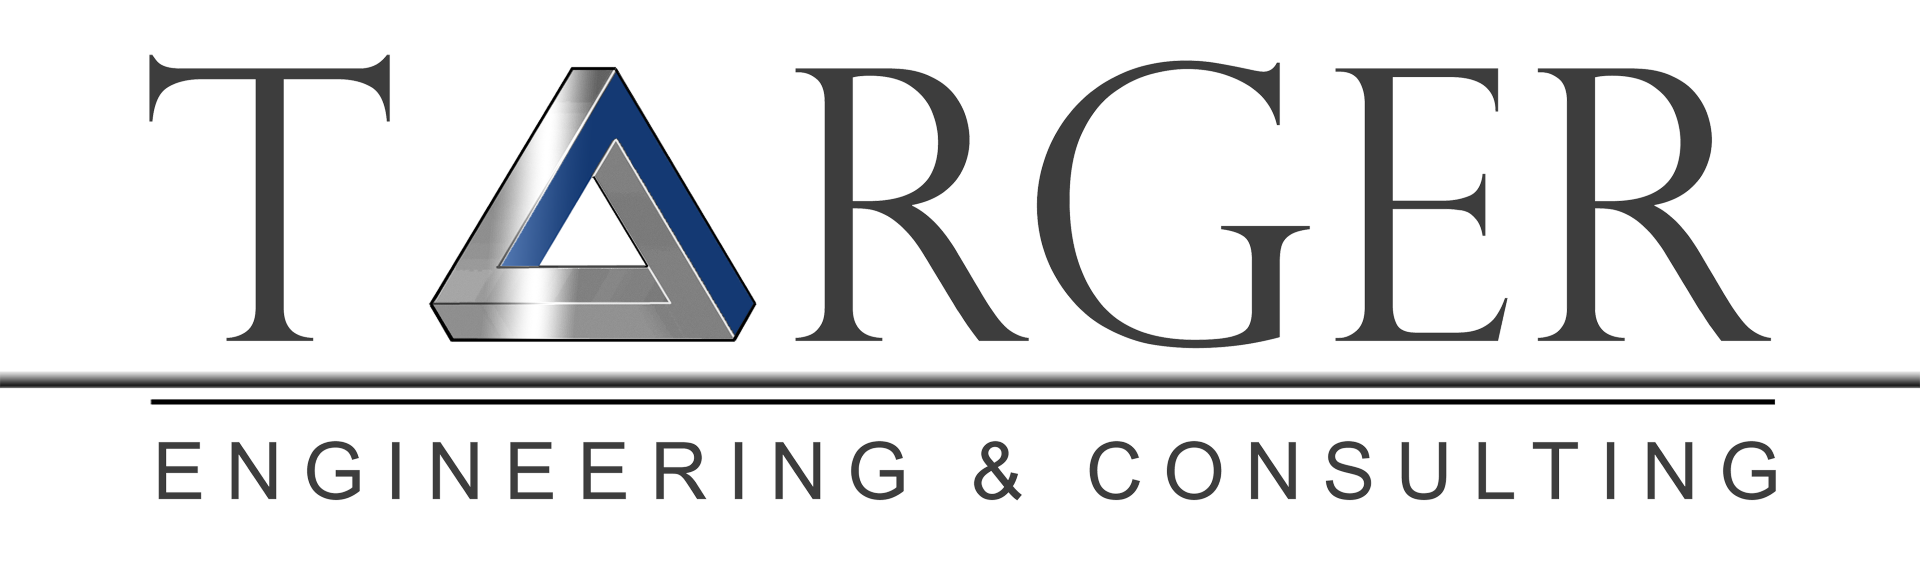 Targer Engineering & Consulting